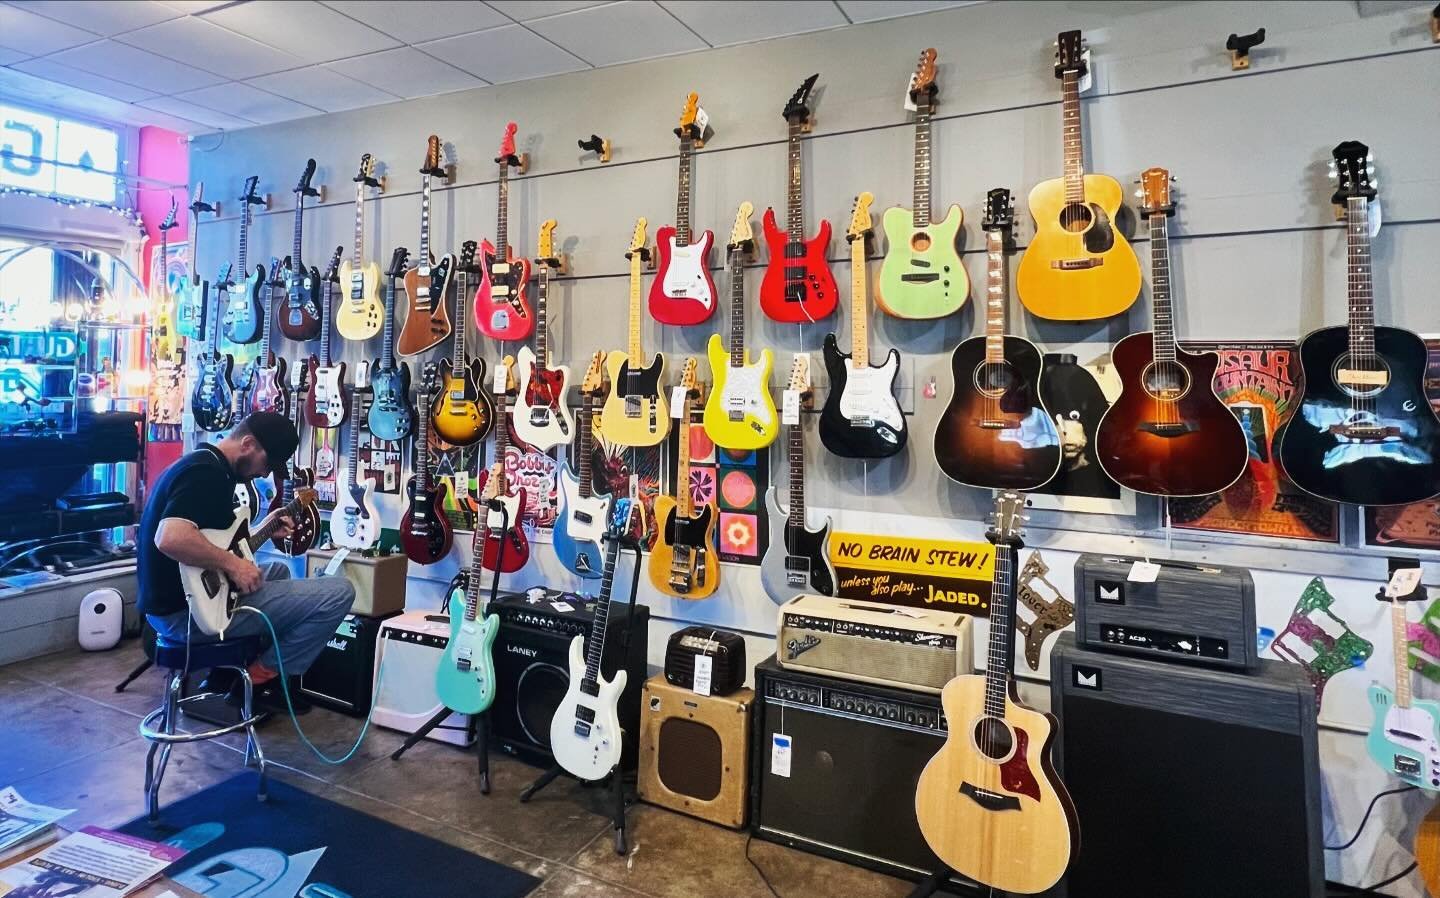 The Wall is in a good mood today. Very colorful and waiting for you. It&rsquo;s asking for you. Come play! #oaklandguitars